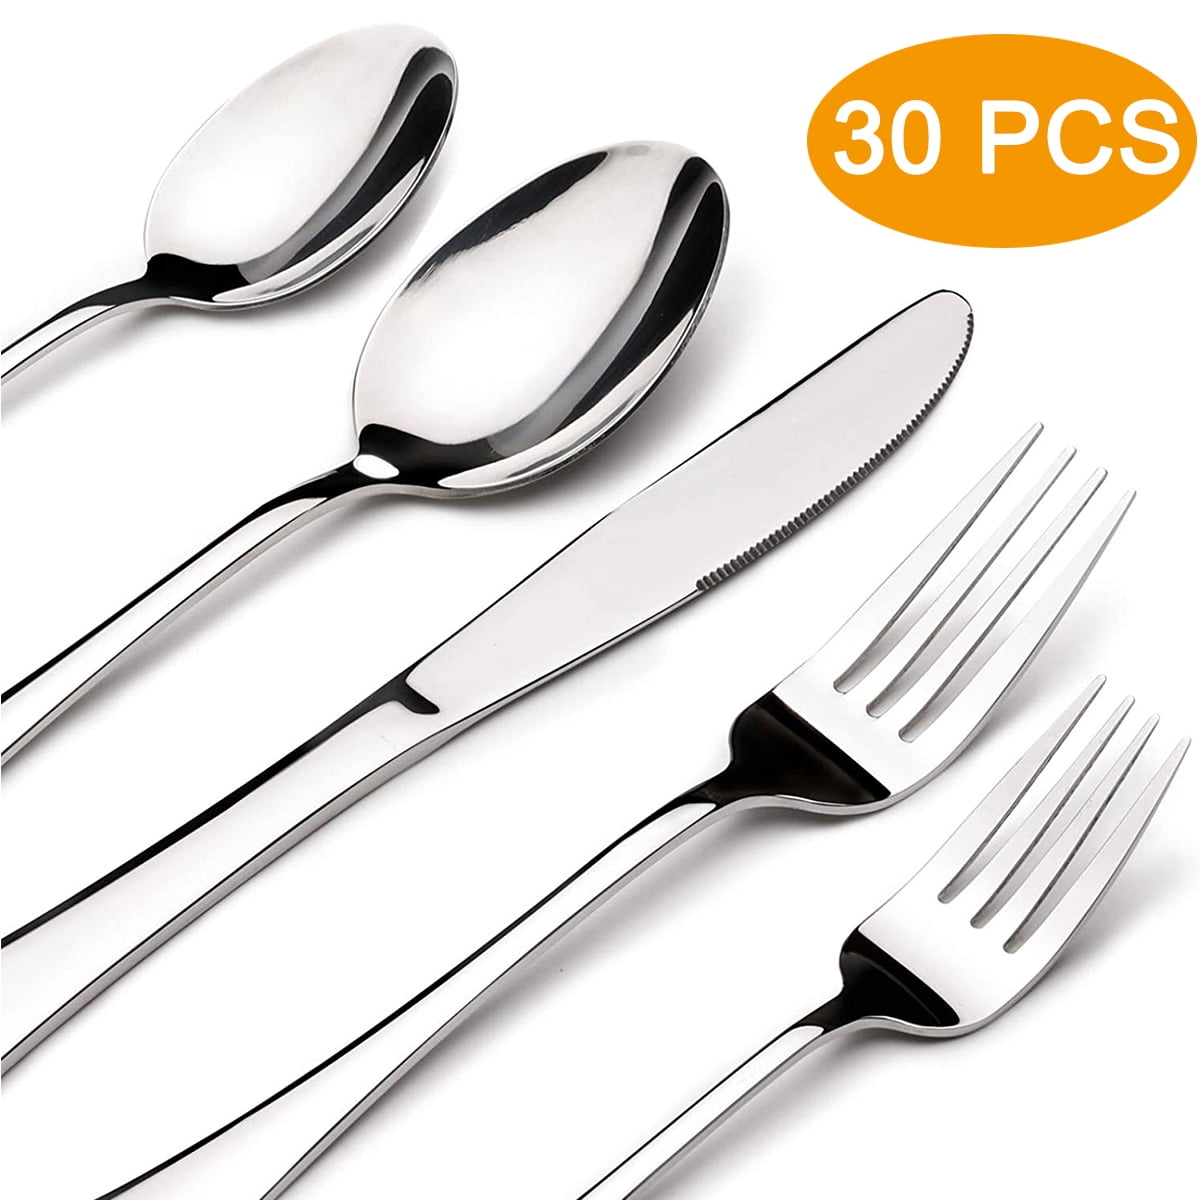 Annova Kids Silverware 6 Pieces Stainless Steel Children's Flatware Set 3 x Forks, 3 x Tablespoon Plastic Handle, Toddler Ute